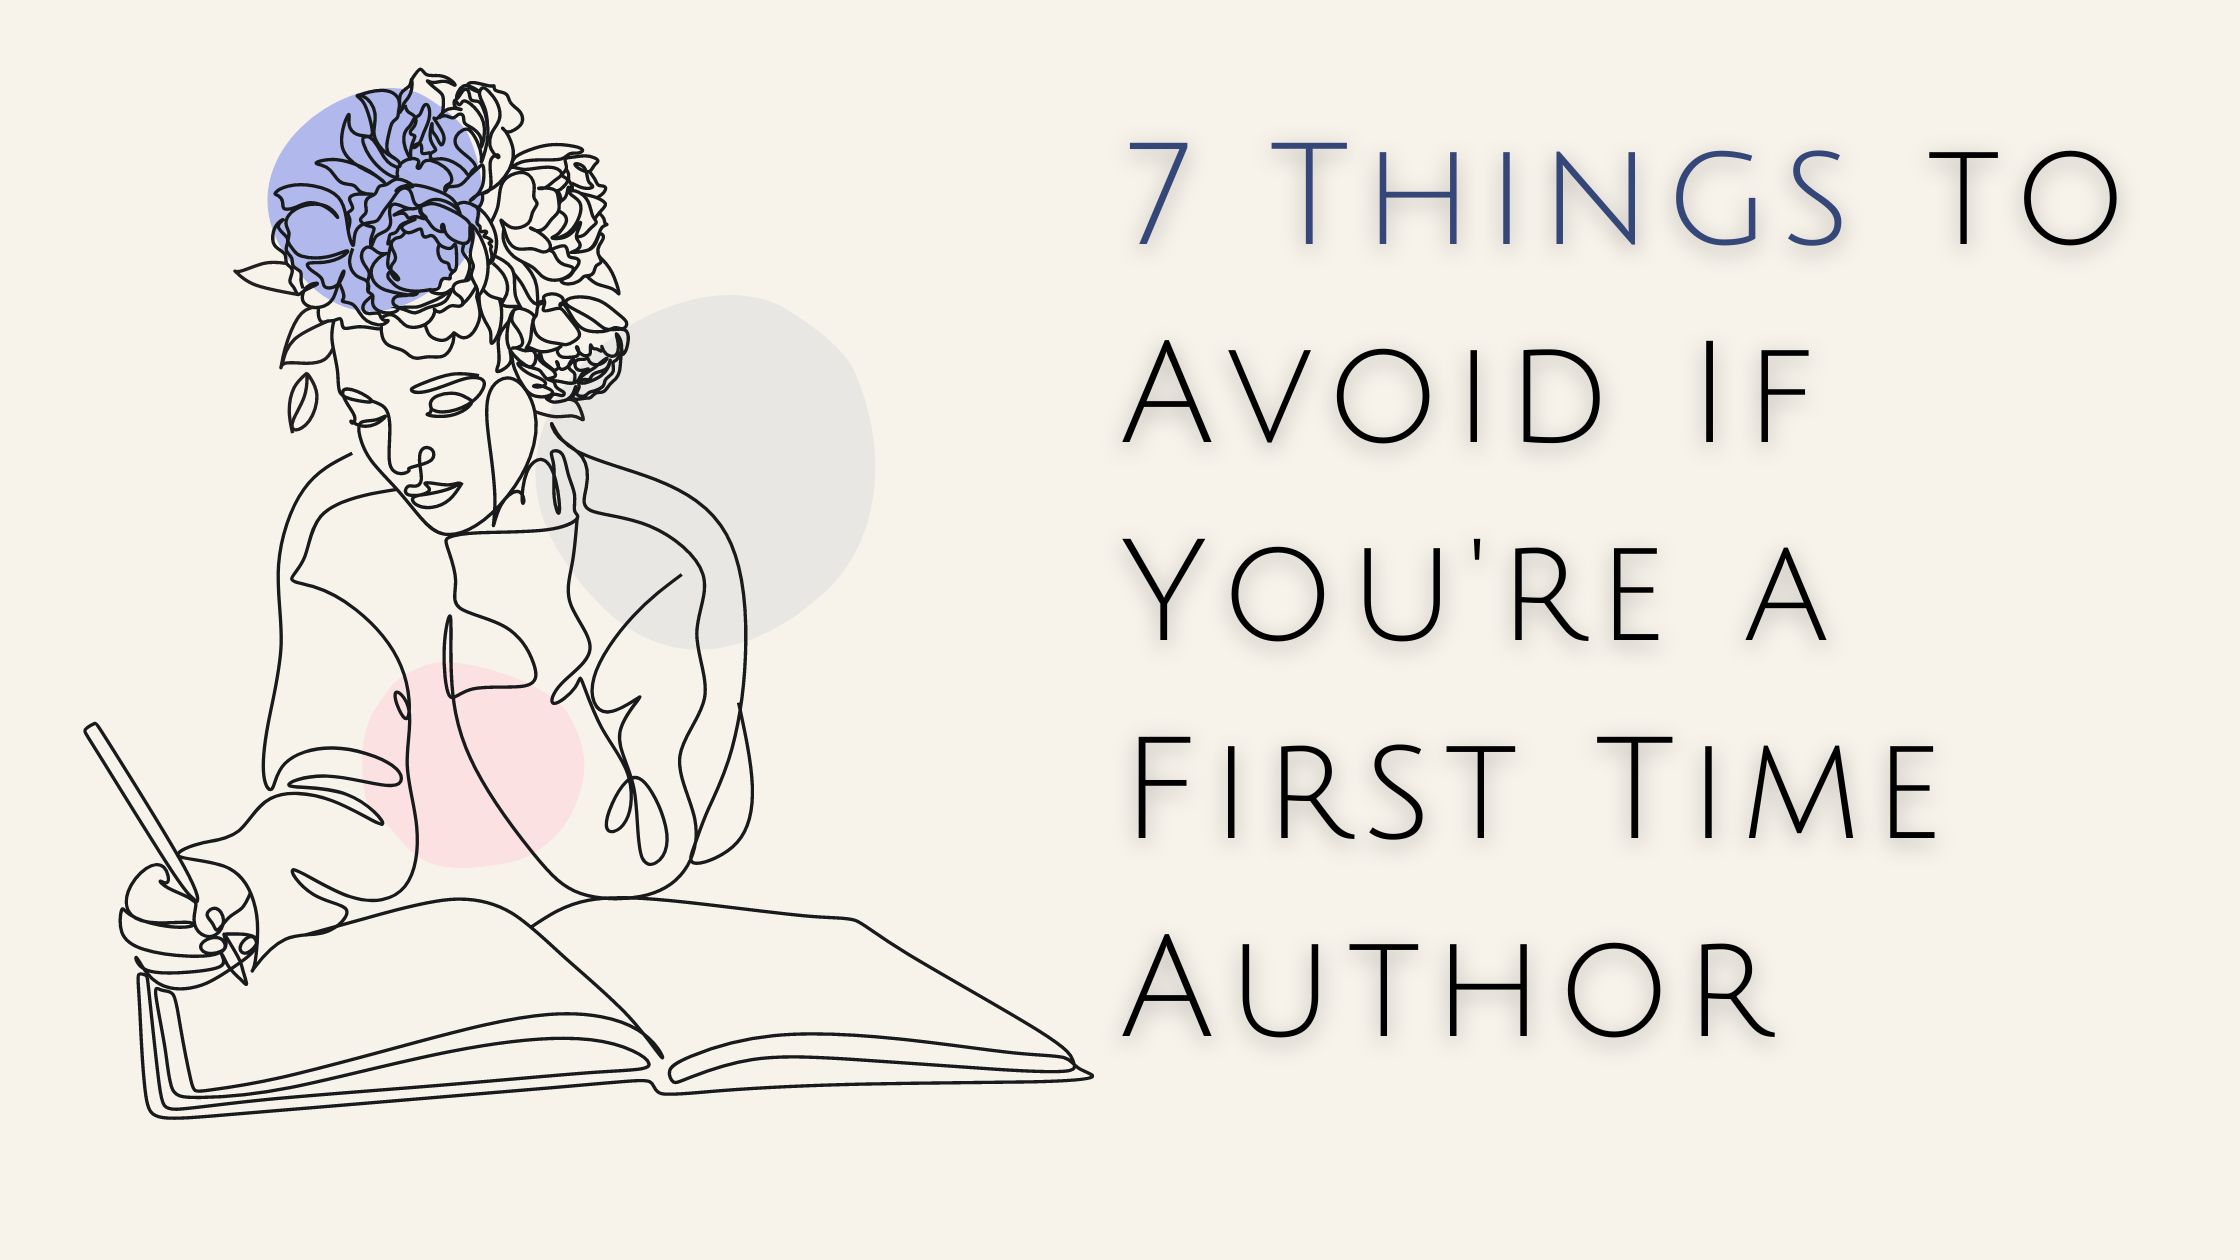 7 Things to Avoid If You’re a First Time Author